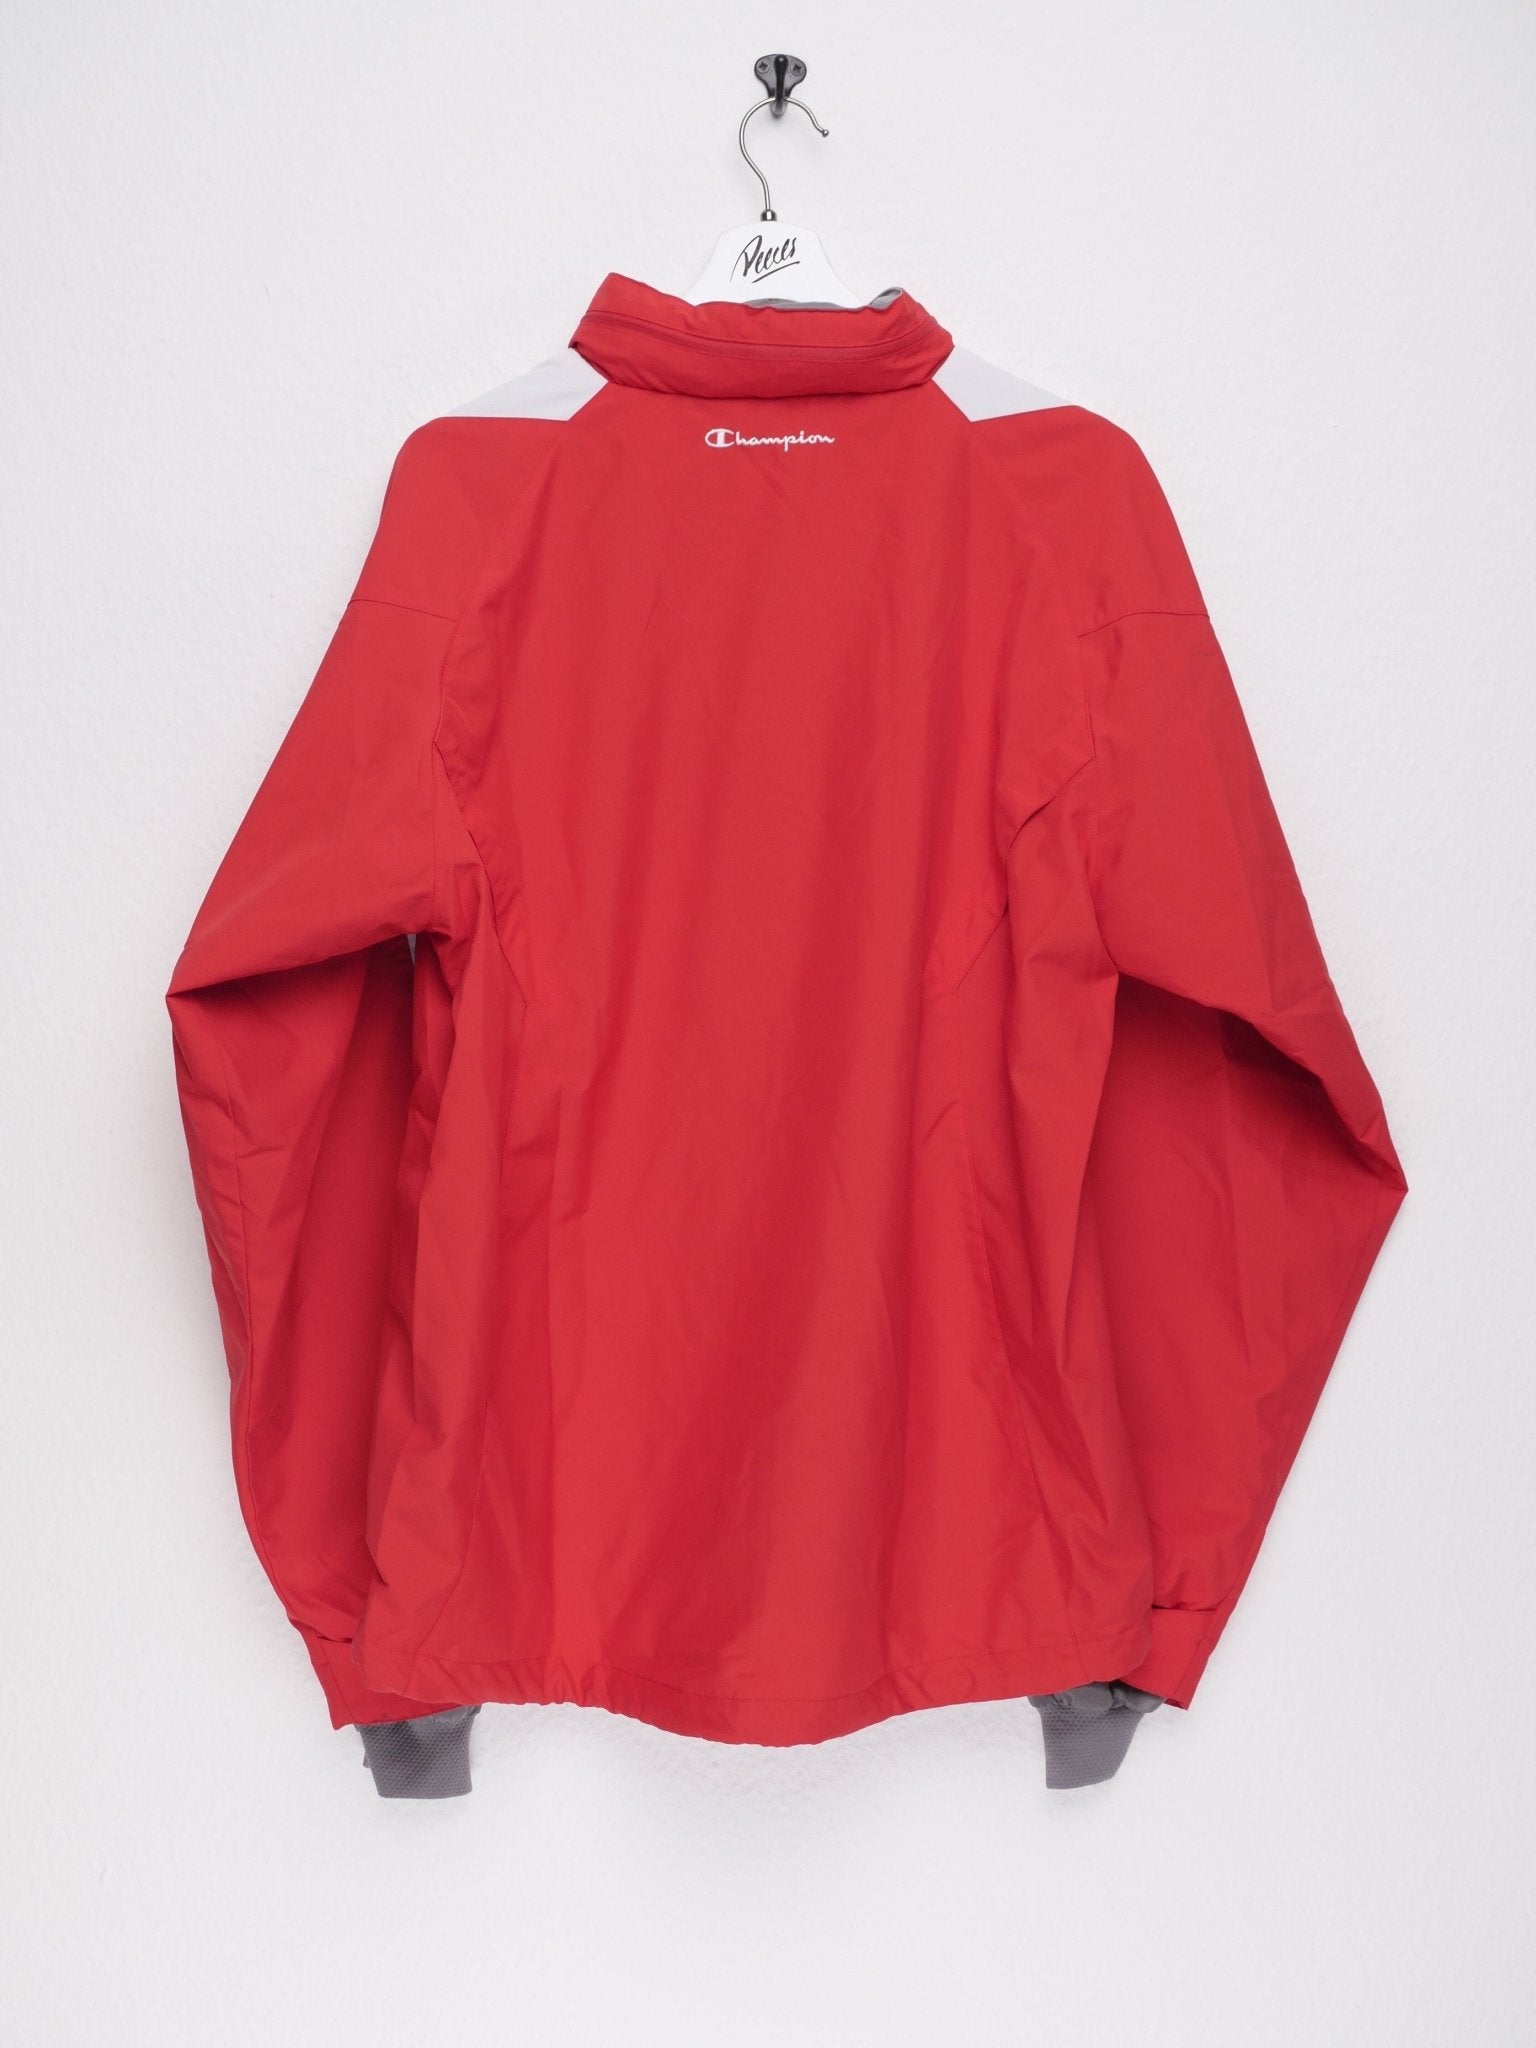 champion embroidered Spellout/Logo red Track Jacket - Peeces